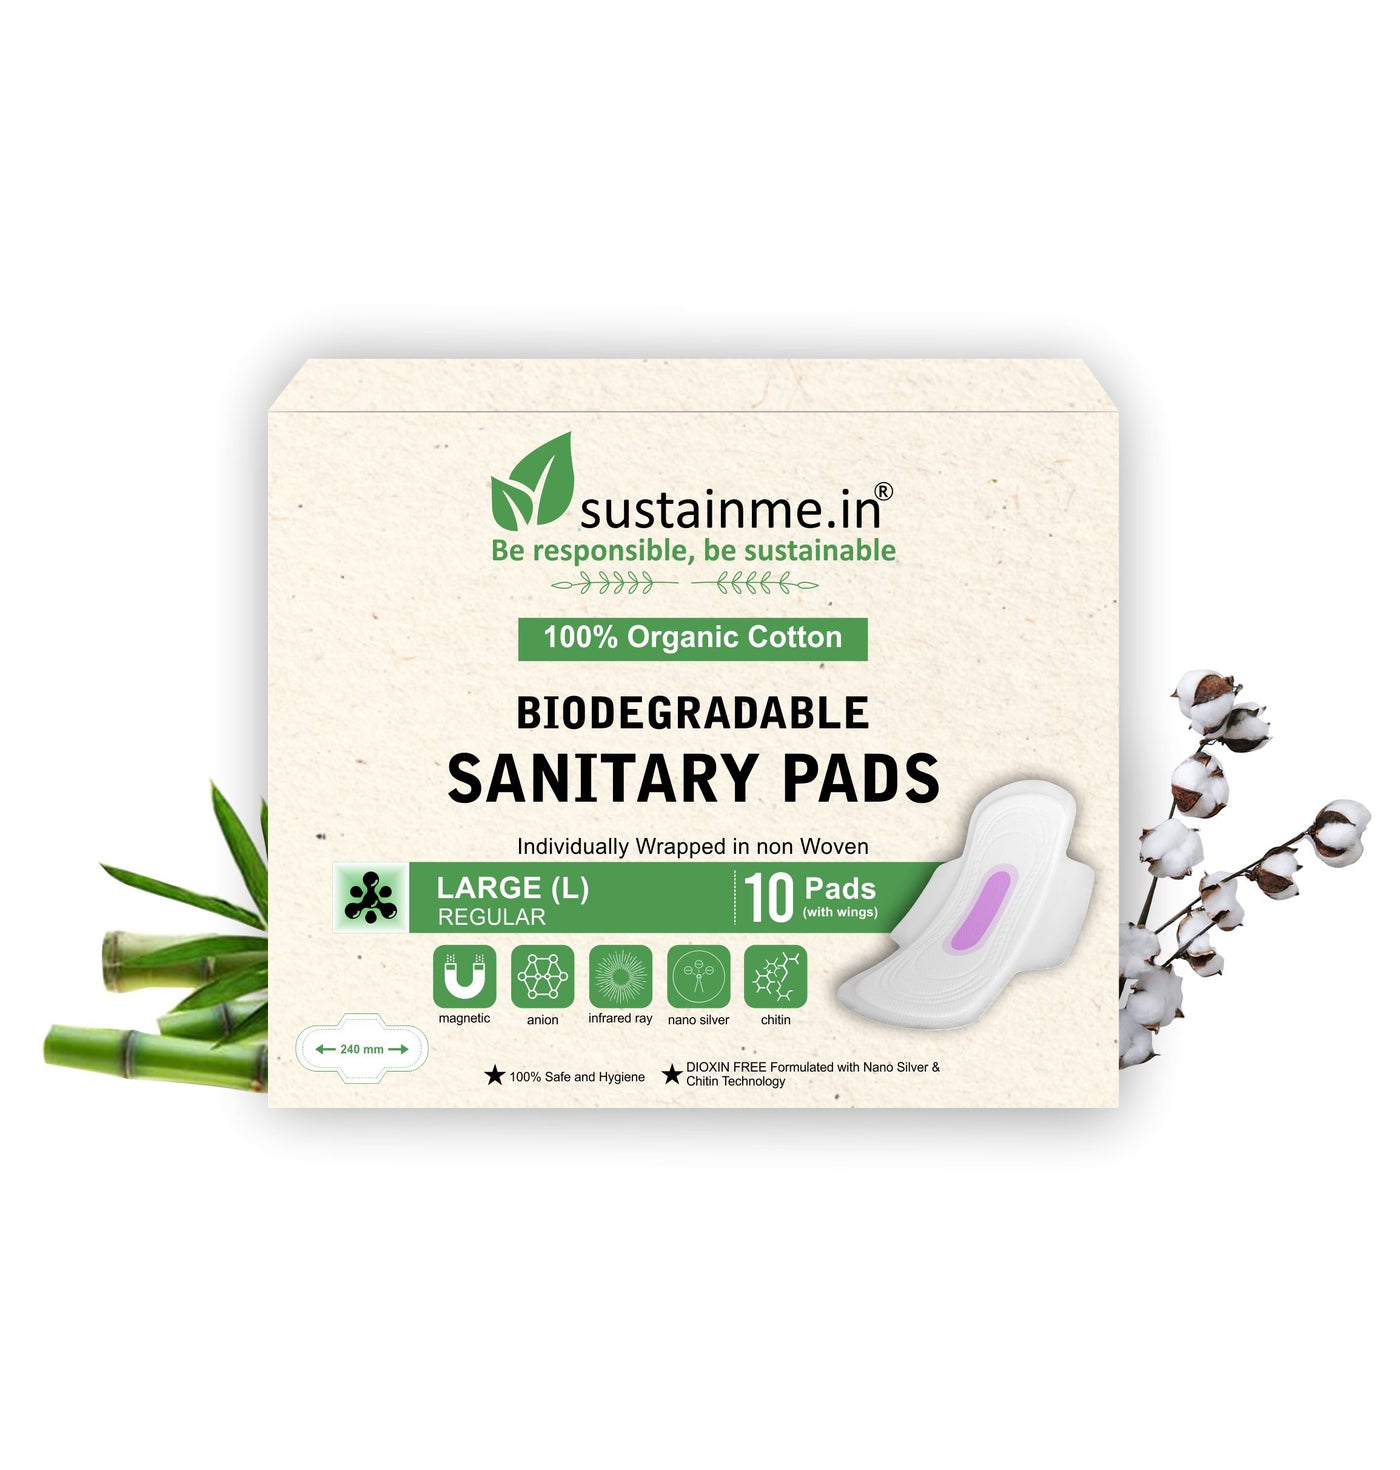 Why Bio-degradable Pads are Better than Regular Sanitary Pads? –